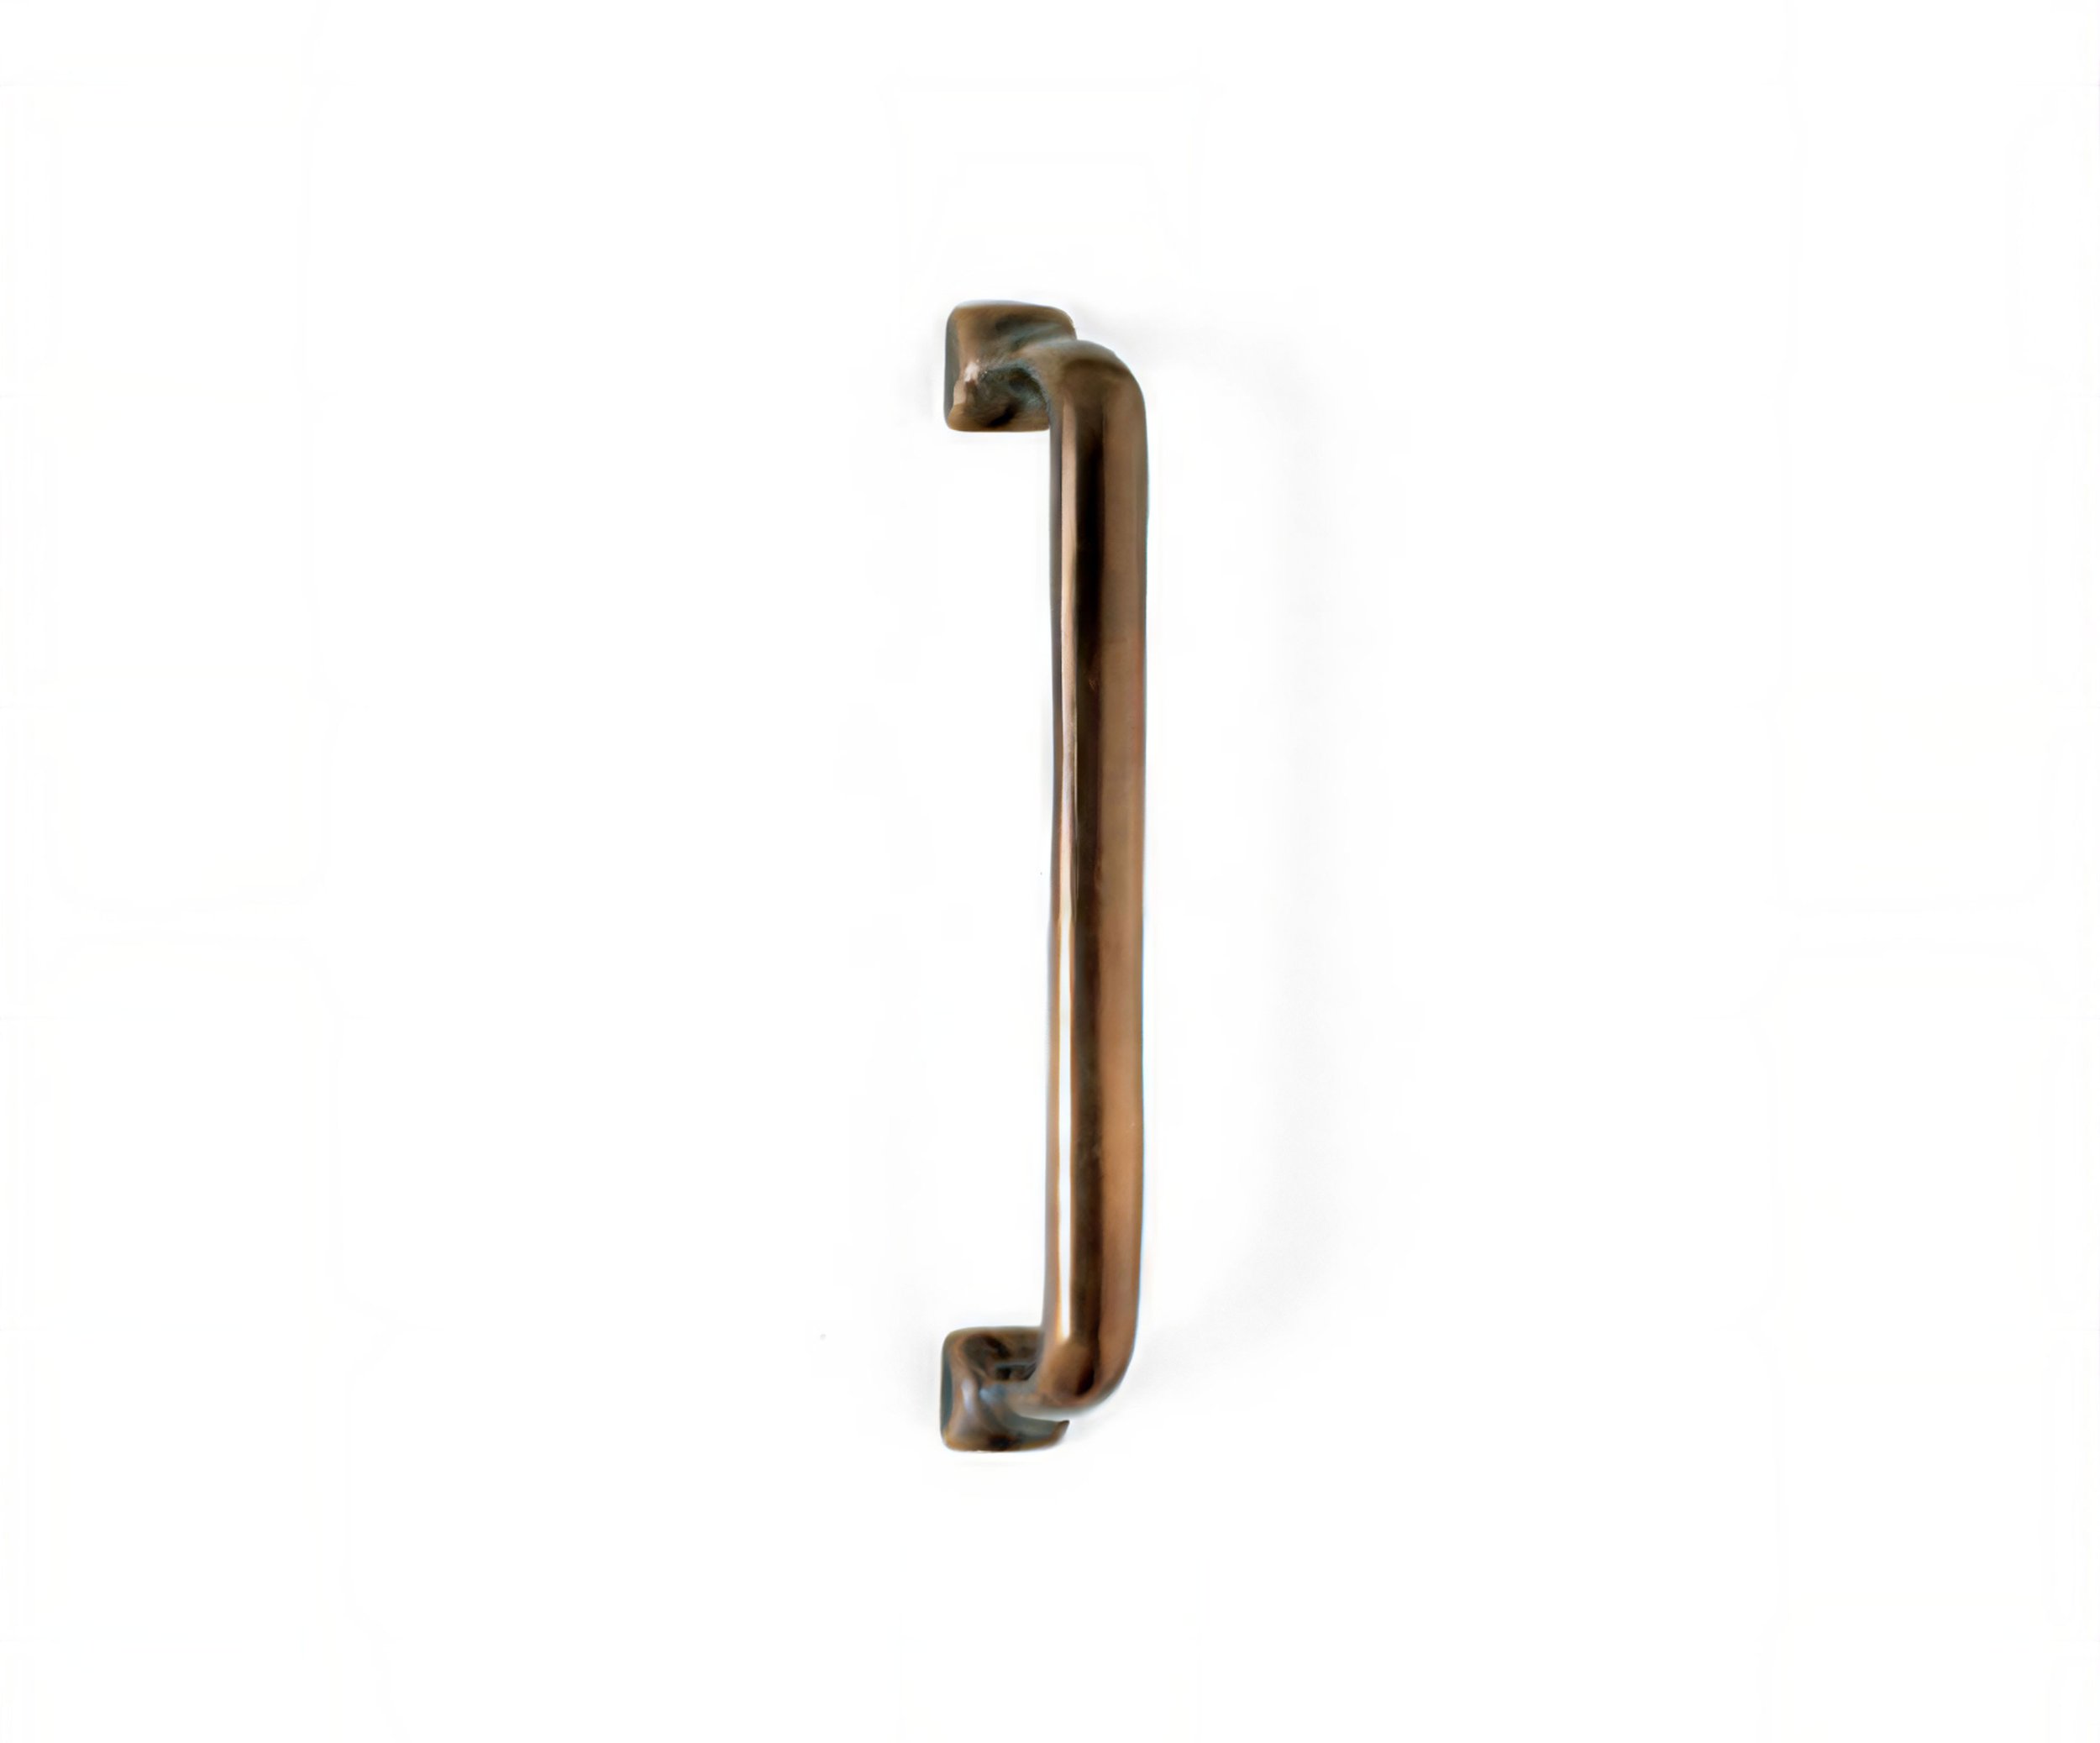 CK-515 Square Foot Cabinet Pull